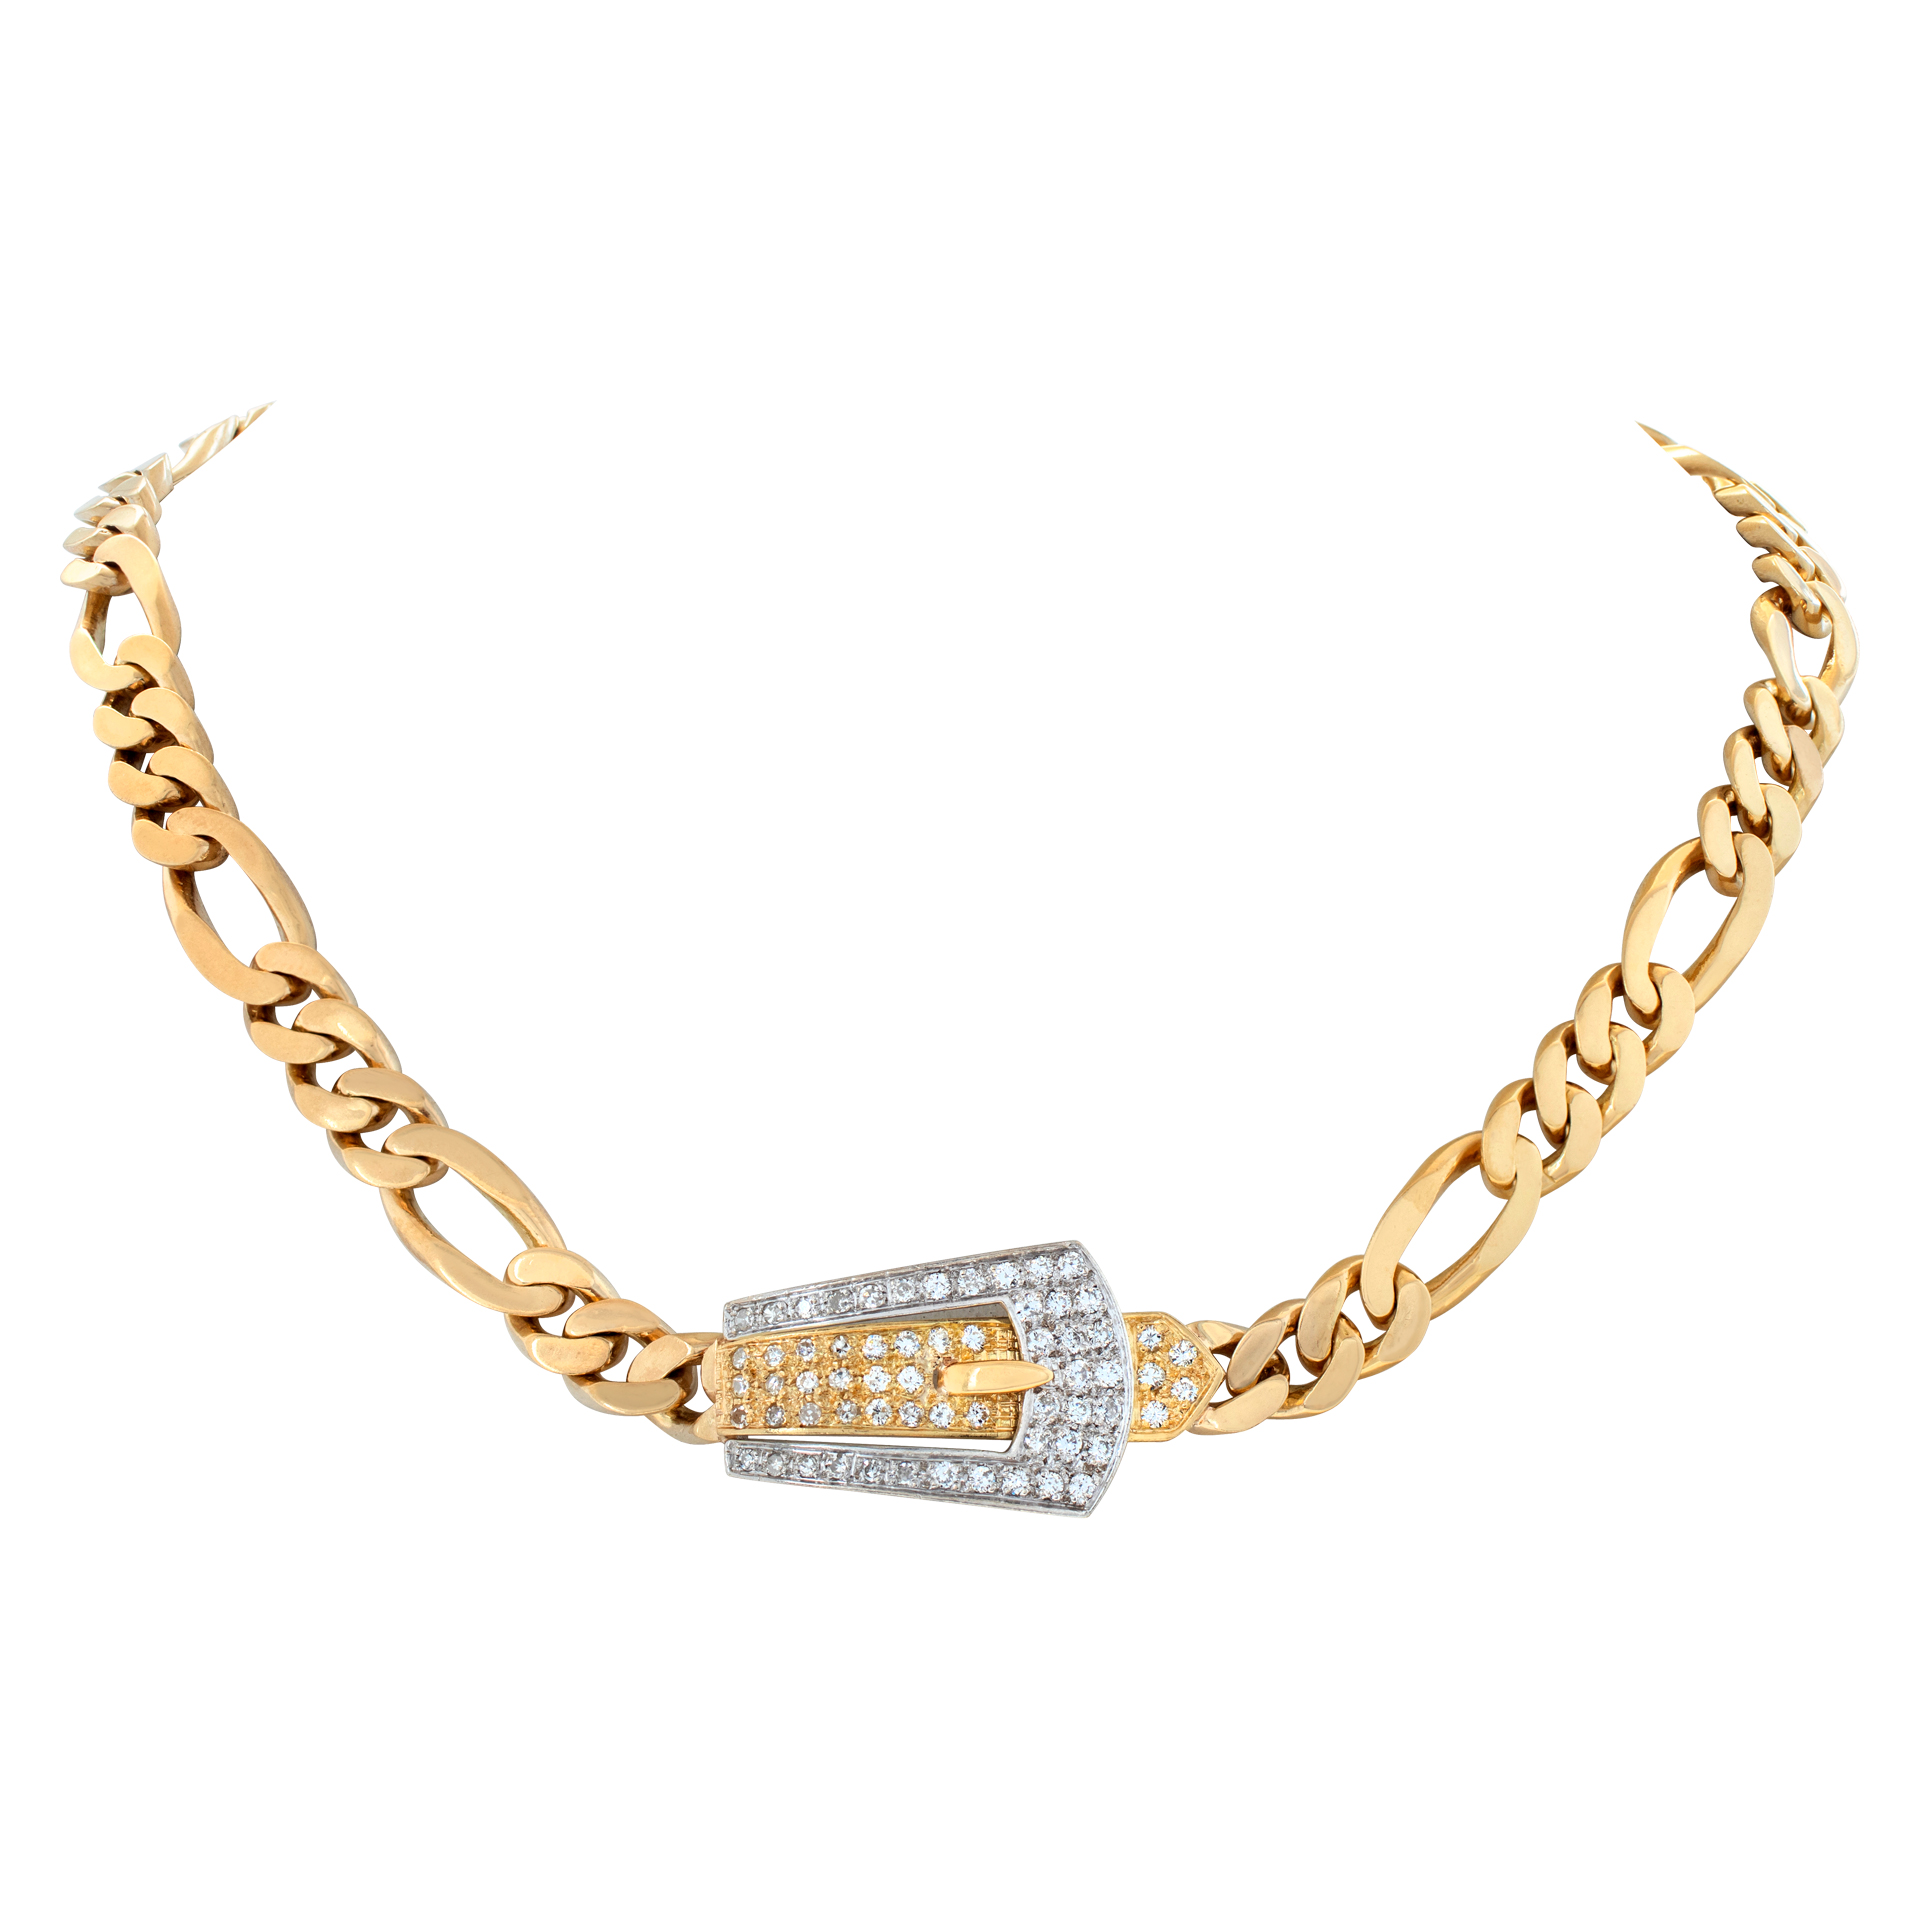 Diamond "Buckle" necklace in 18k white and yellow gold